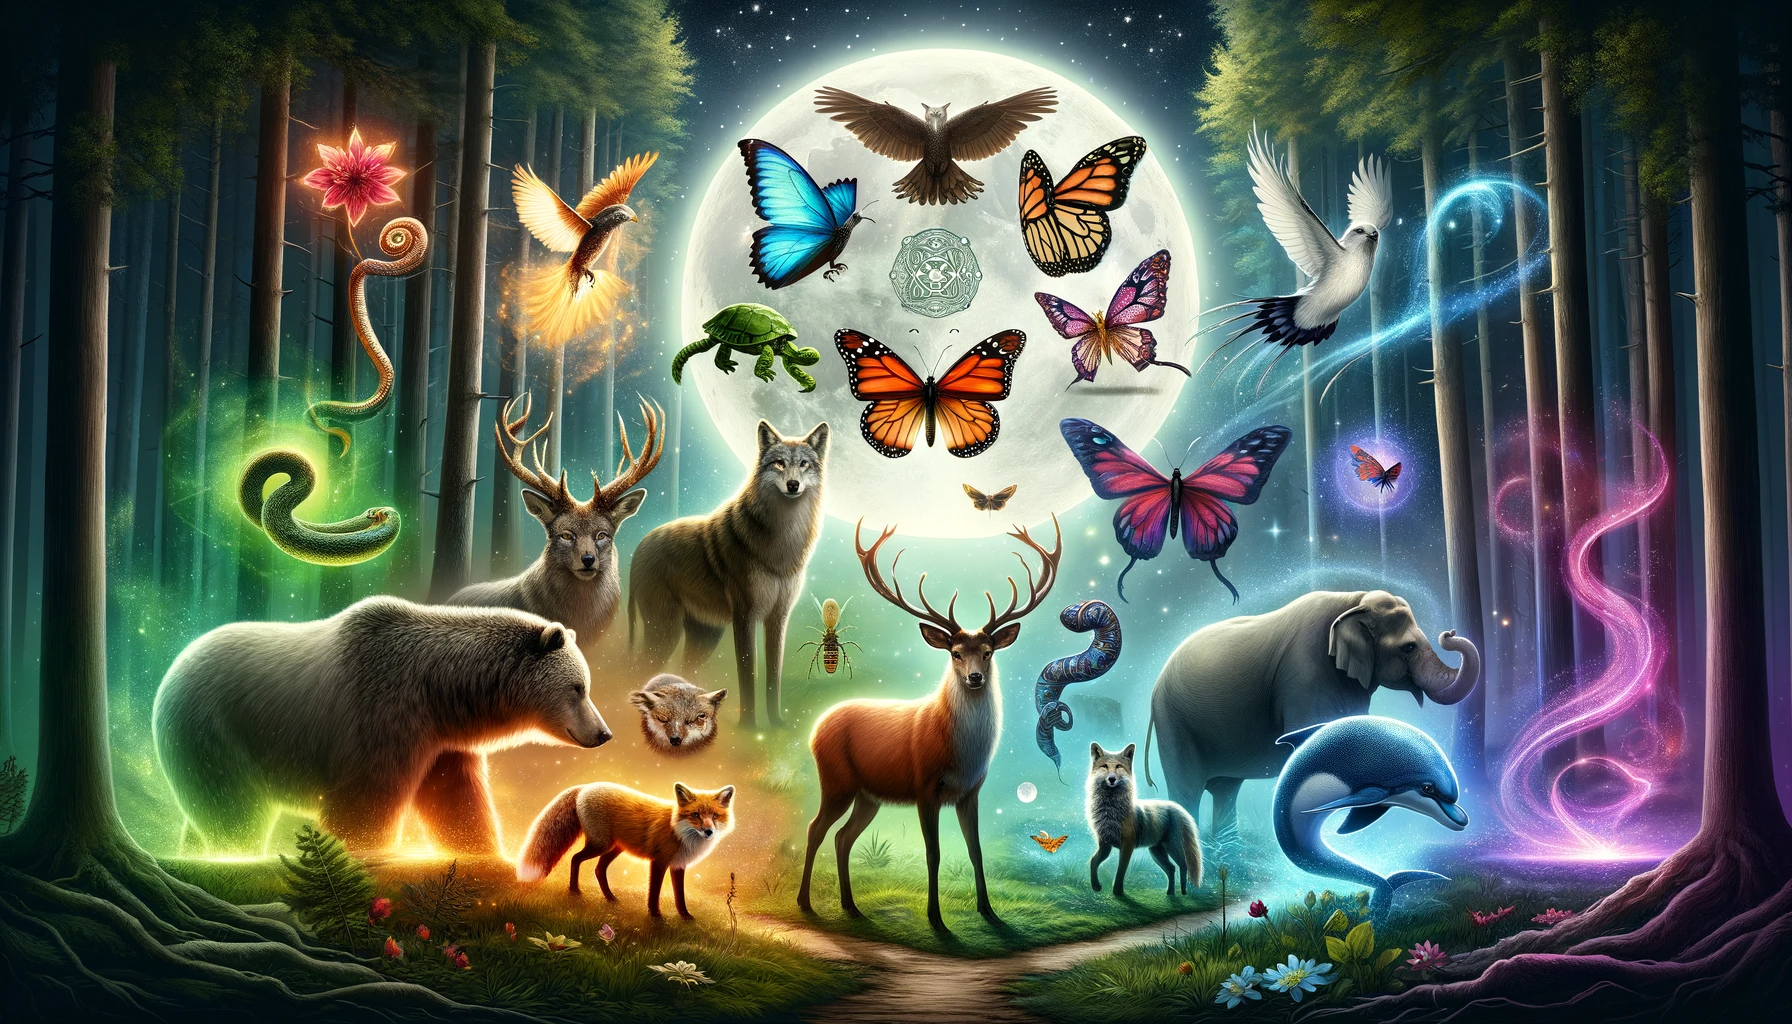 ·E 2023 11 24 05.09.34   A mystical and vibrant digital illustration for a blog post featuring various animal spirits in a harmonious composition. The image should depict a se.png